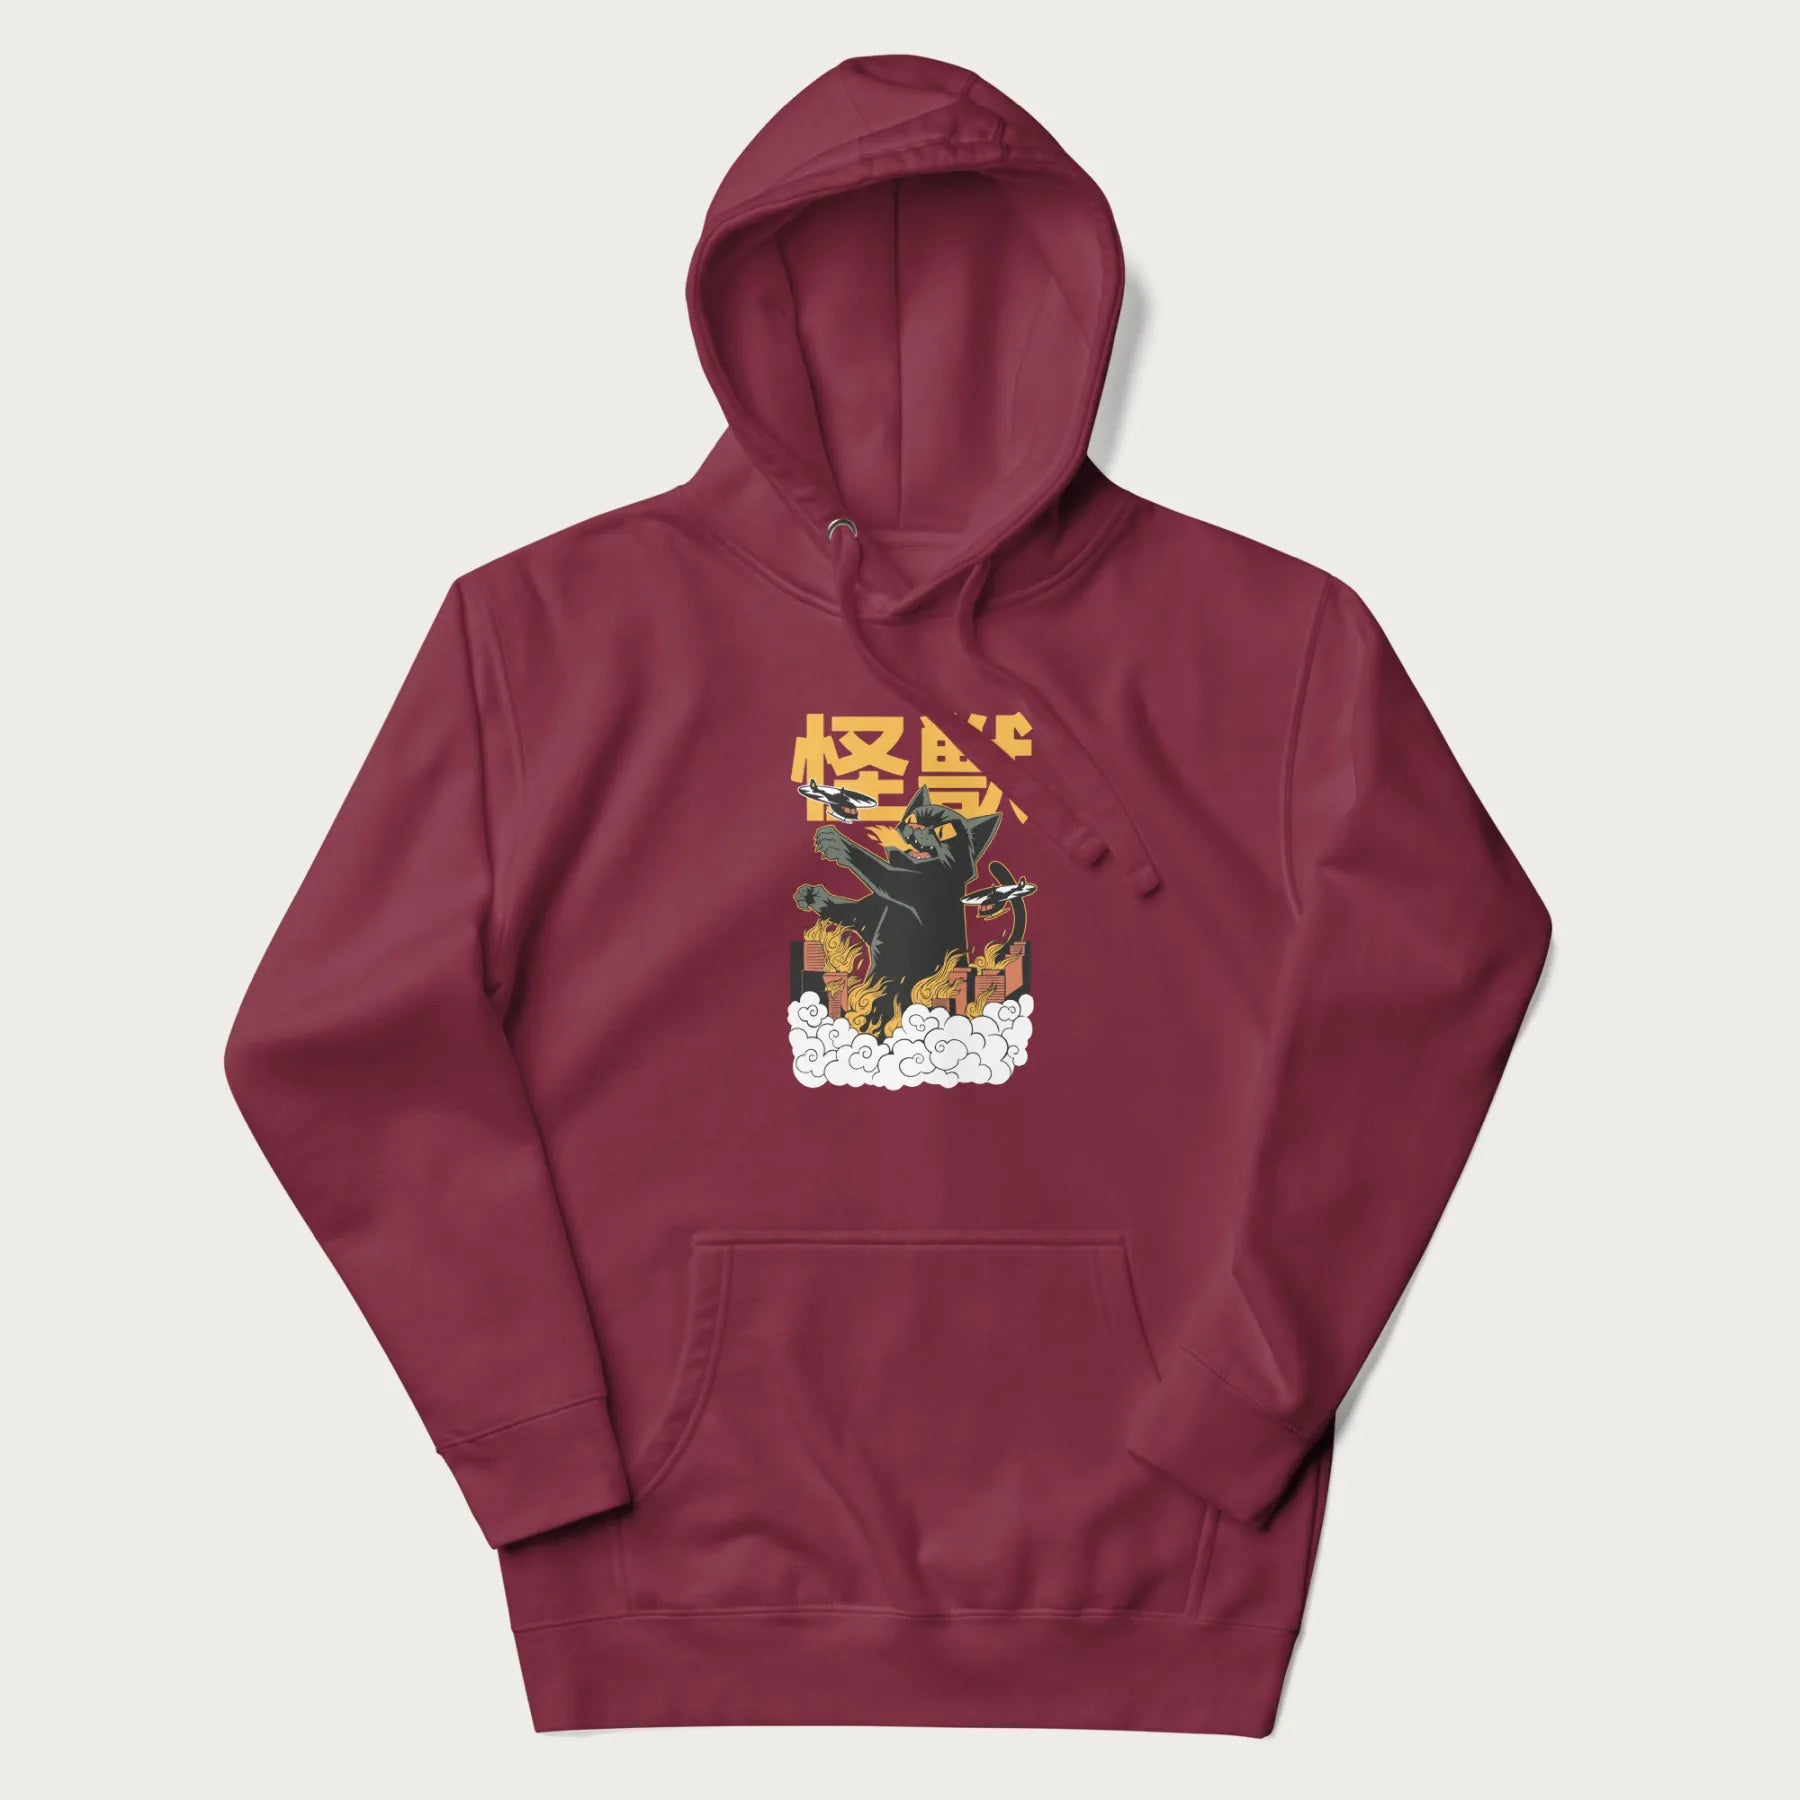 Maroon hoodie with graphic of a 'Kaiju Cat' with helicopters and flames in a burning city.